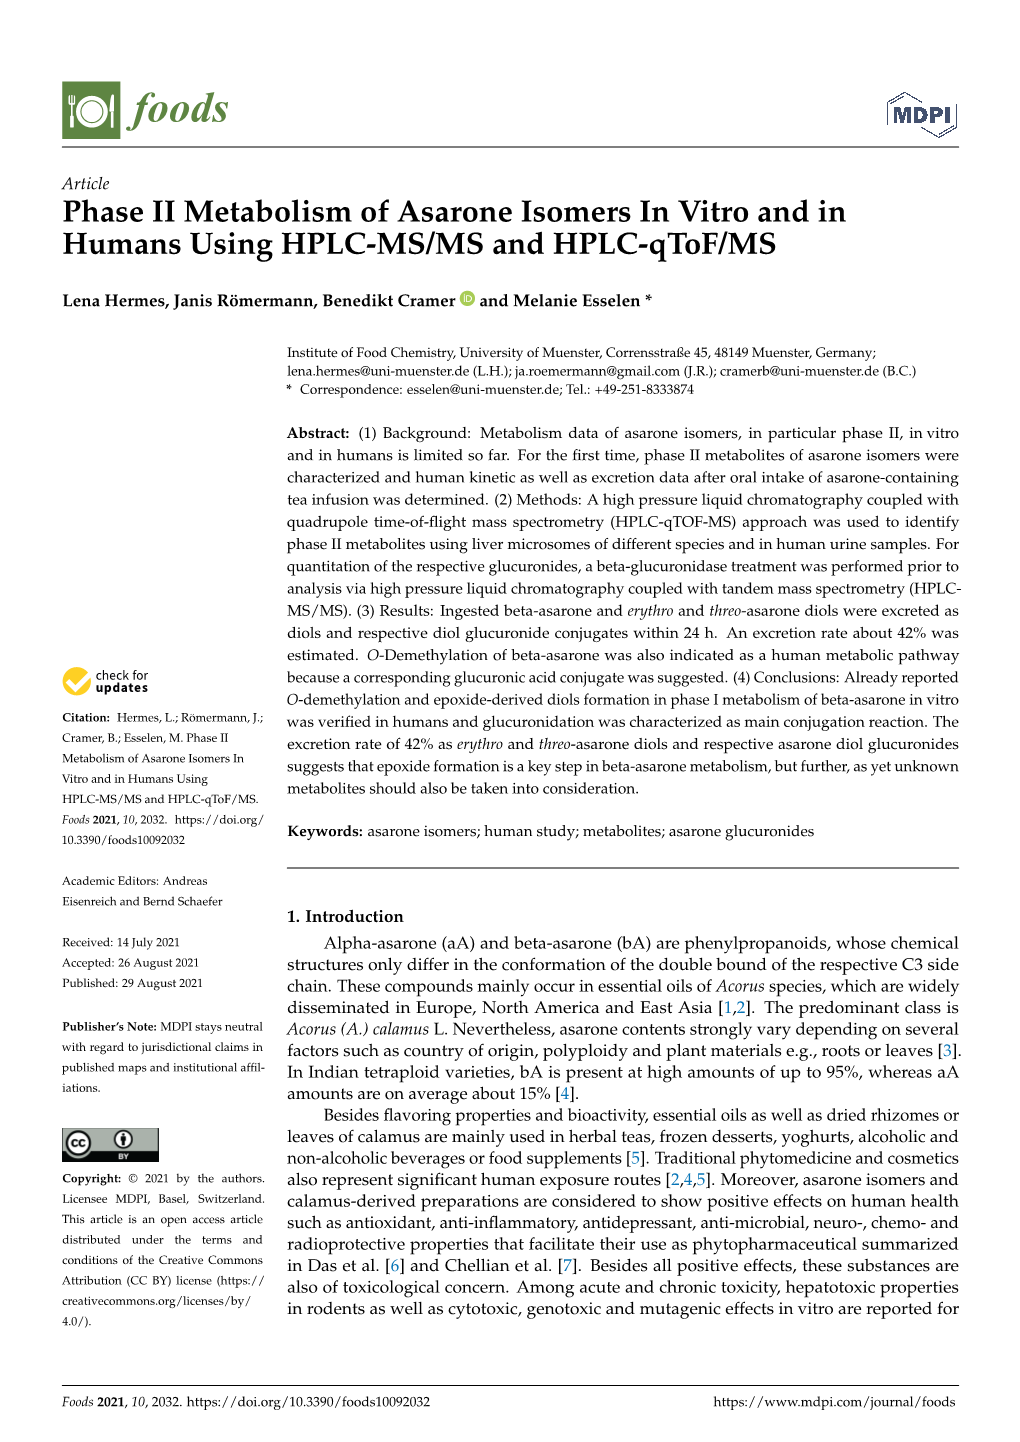 Phase II Metabolism of Asarone Isomers in Vitro and in Humans Using HPLC-MS/MS and HPLC-Qtof/MS